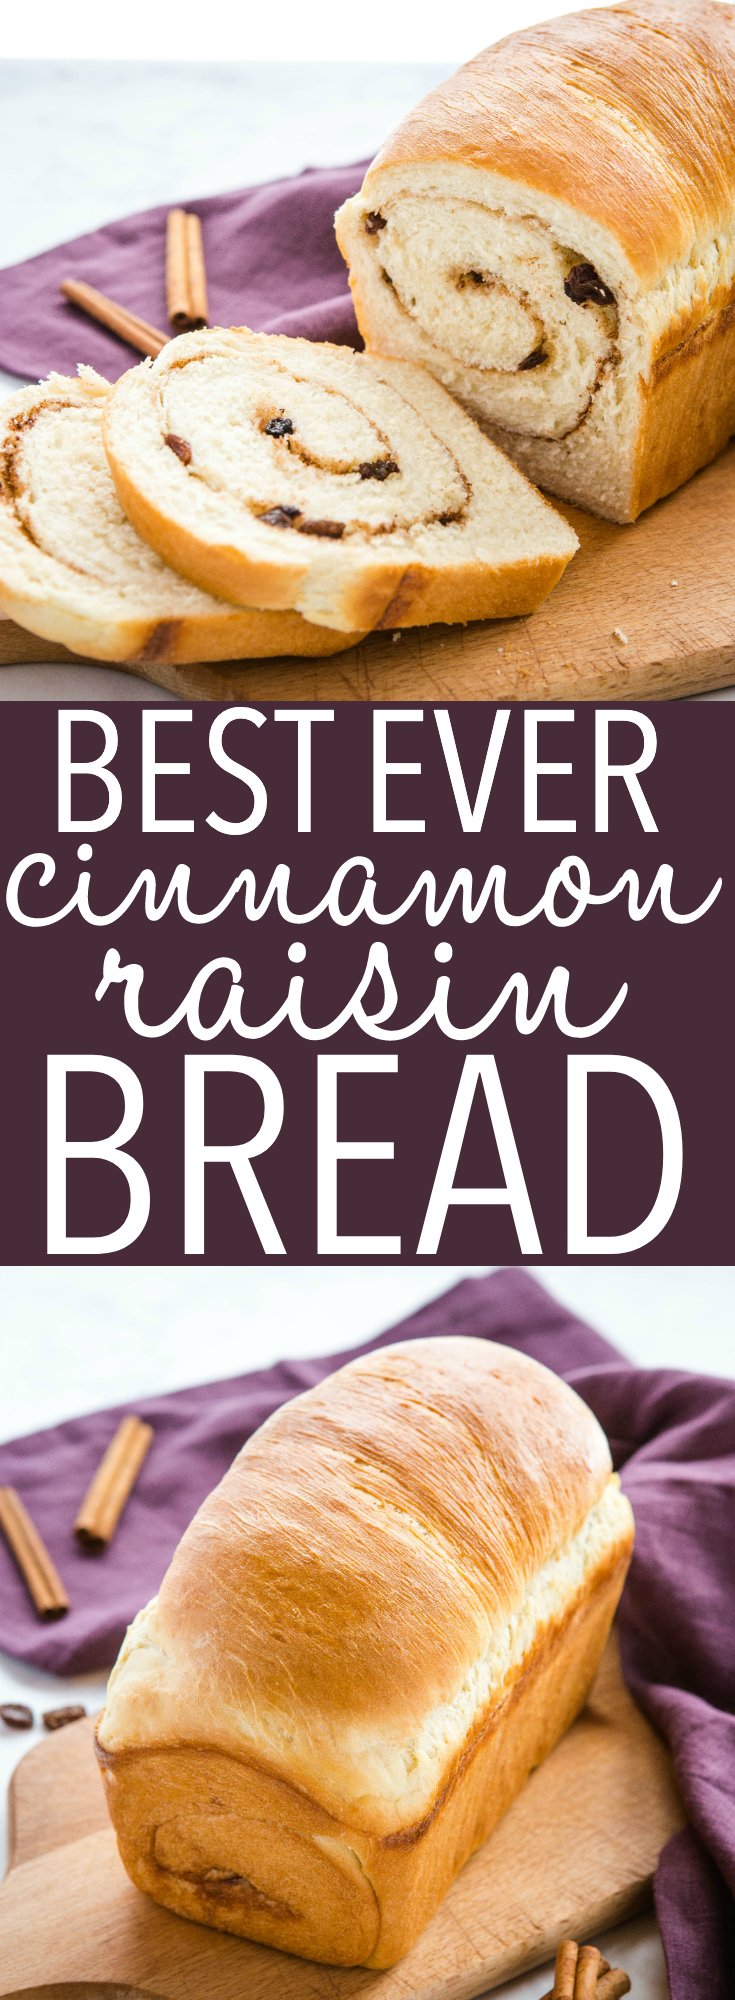 This Best Ever Cinnamon Raisin Bread is the perfect soft, sweet bread recipe with a sweet cinnamon swirl and juicy raisins! Makes a delicious snack or breakfast! Recipe from thebusybaker.ca! #cinnamon #raisin #bread #toast #homemade #baking #cinnamonraisin #sweet #dough #homemadebread #baker #homesteading #breakfast #snack via @busybakerblog